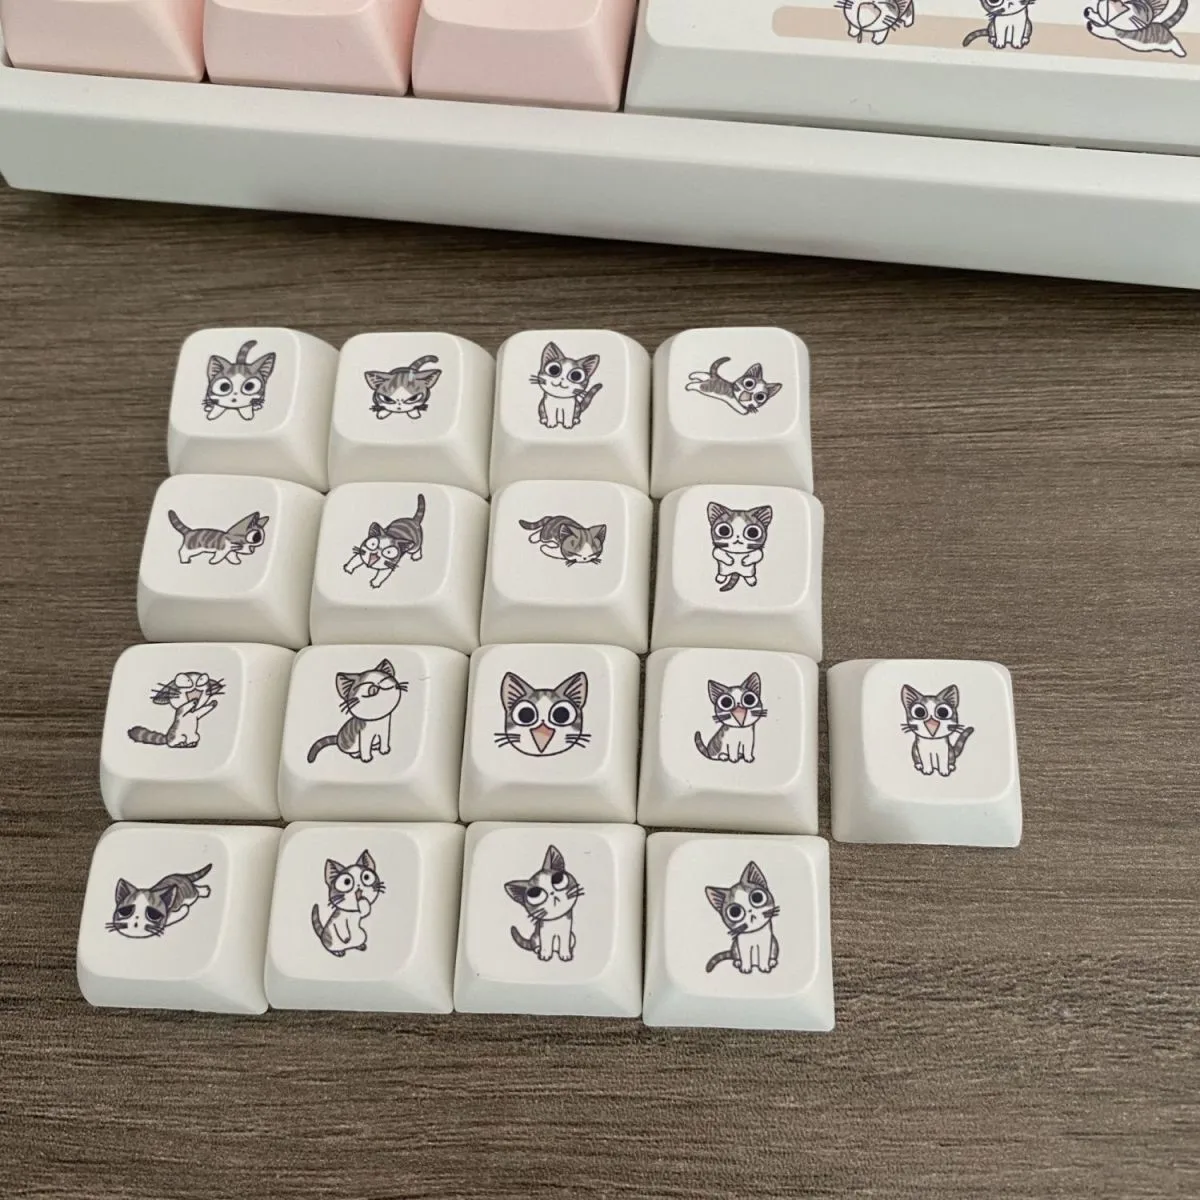 134 Keys Cheese Cat XDA Profile Keycap For Mechanical Gaming Keyboard Cherry Mx Switch PBT Keycaps DYE-SUB Pink Cute Key Caps images - 6